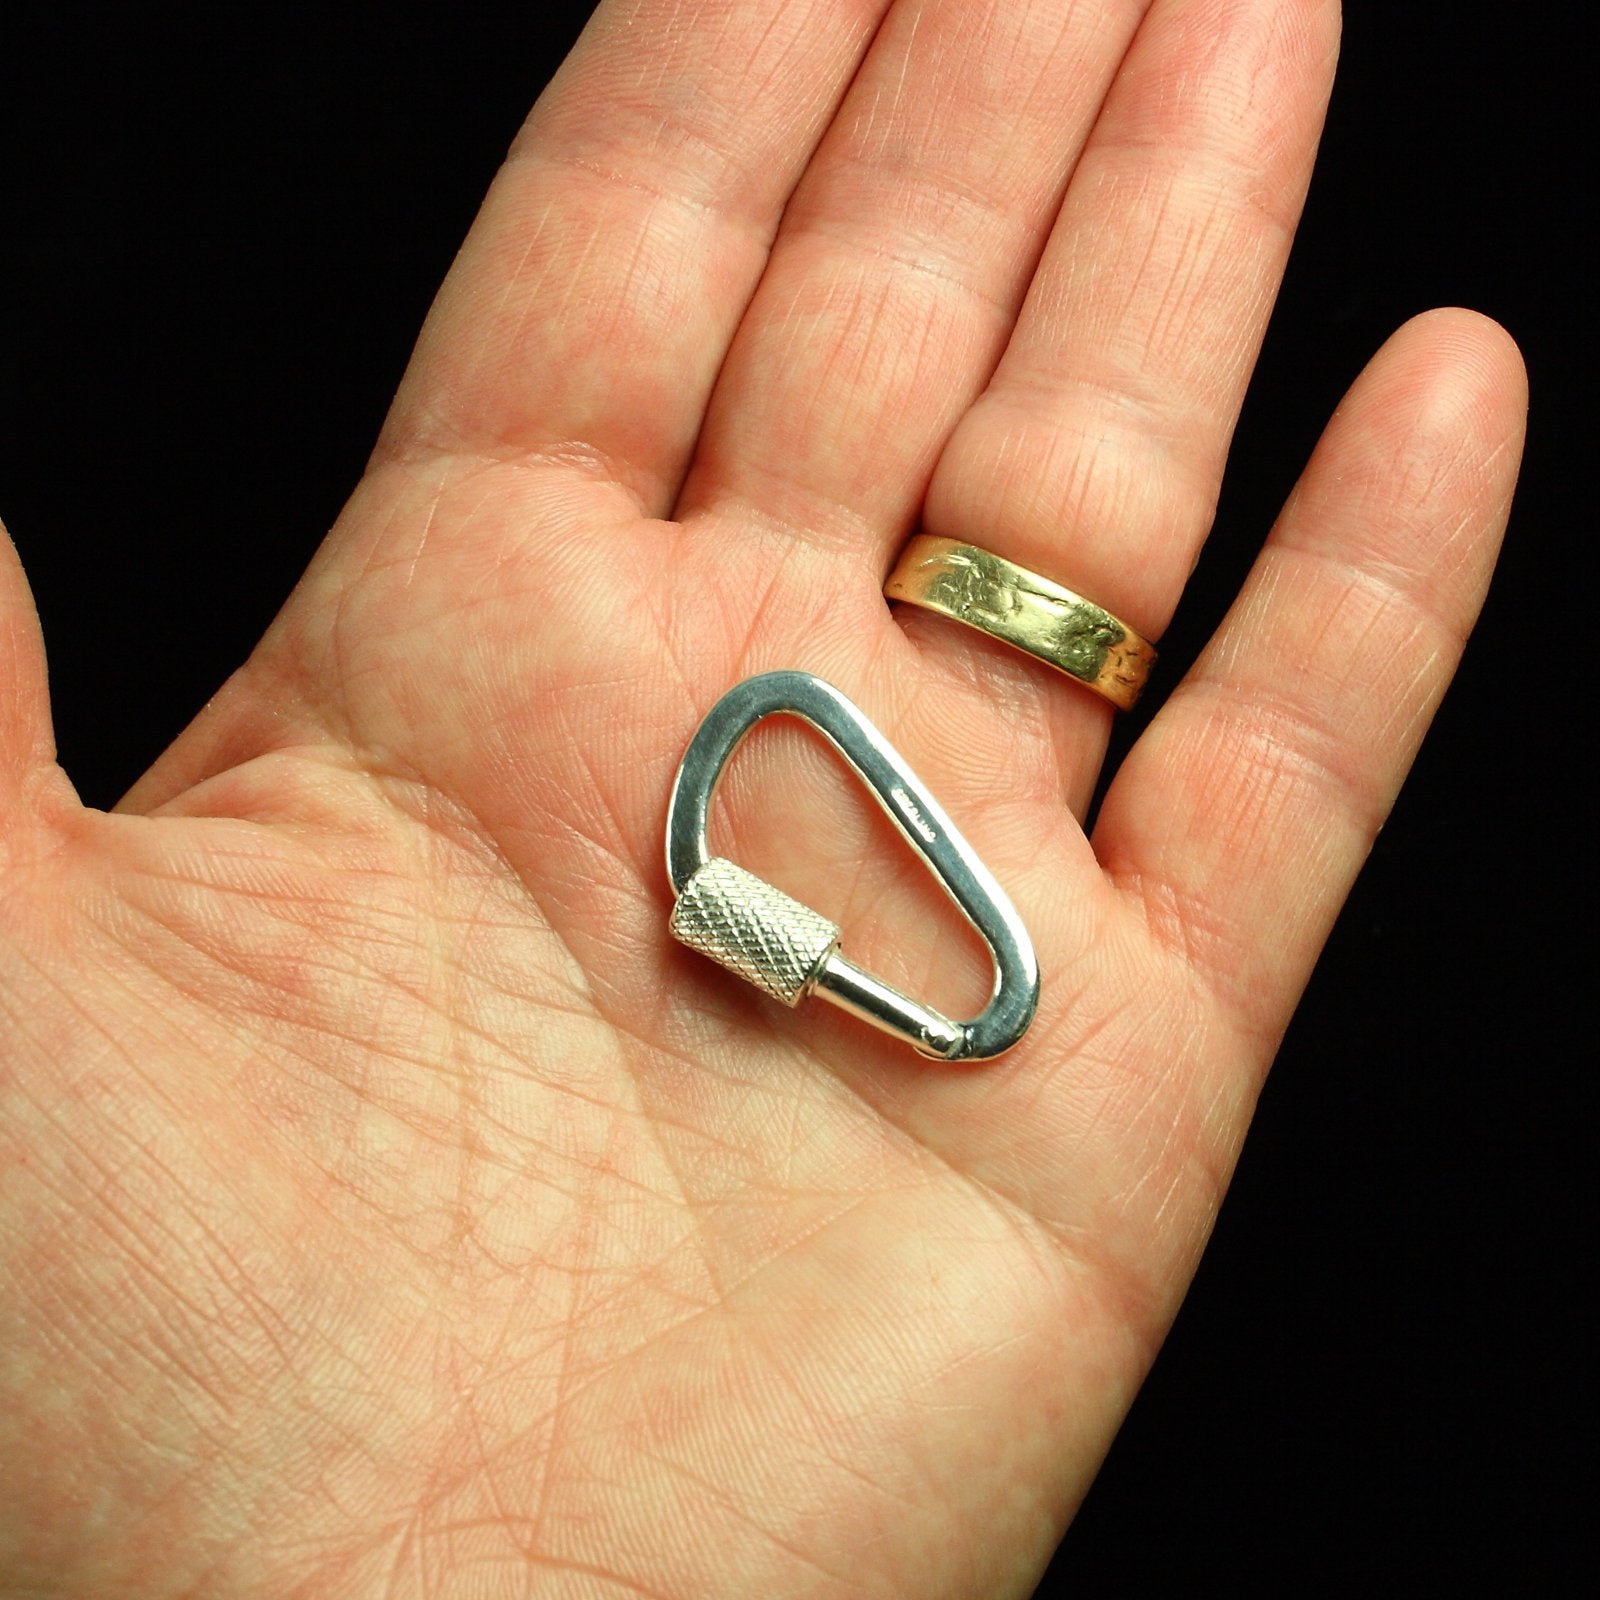 Functional 1.25 inch Carabiner Clasp - Handmade in sterling silver - Modeled held in hand